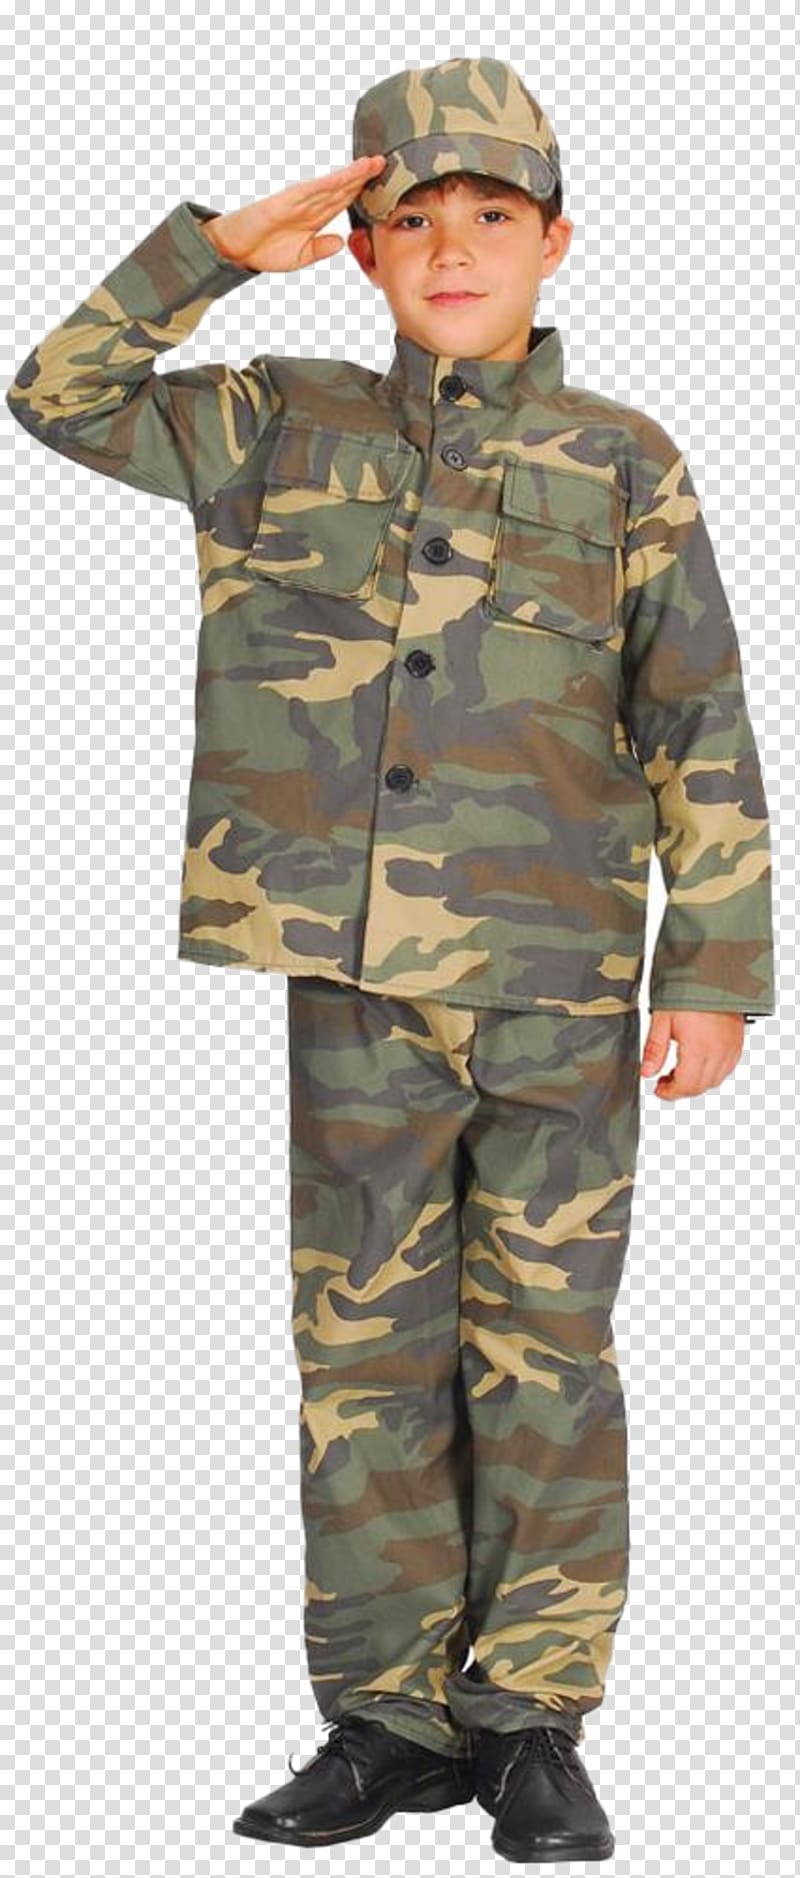 Commando Costume party Military Boy, rambo transparent background PNG clipart